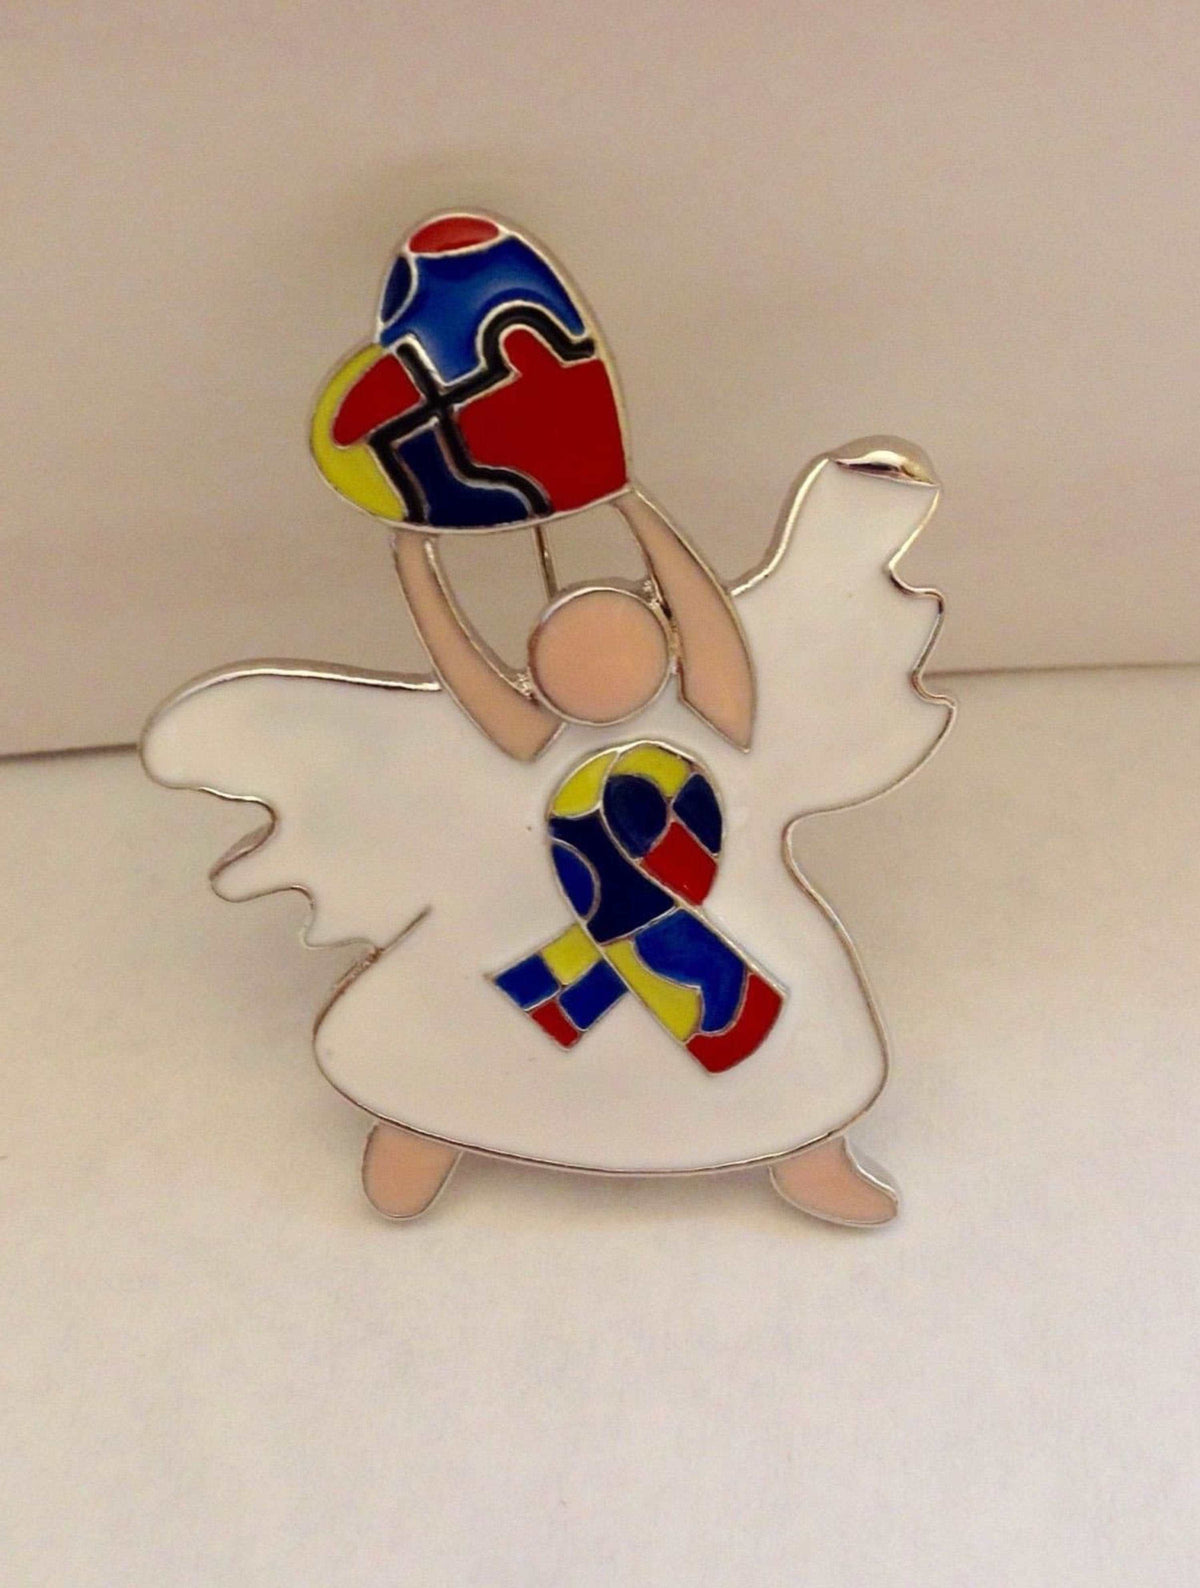 2 Autism Awareness Angel Brooches with White Dresses and Hearts - The House of Awareness